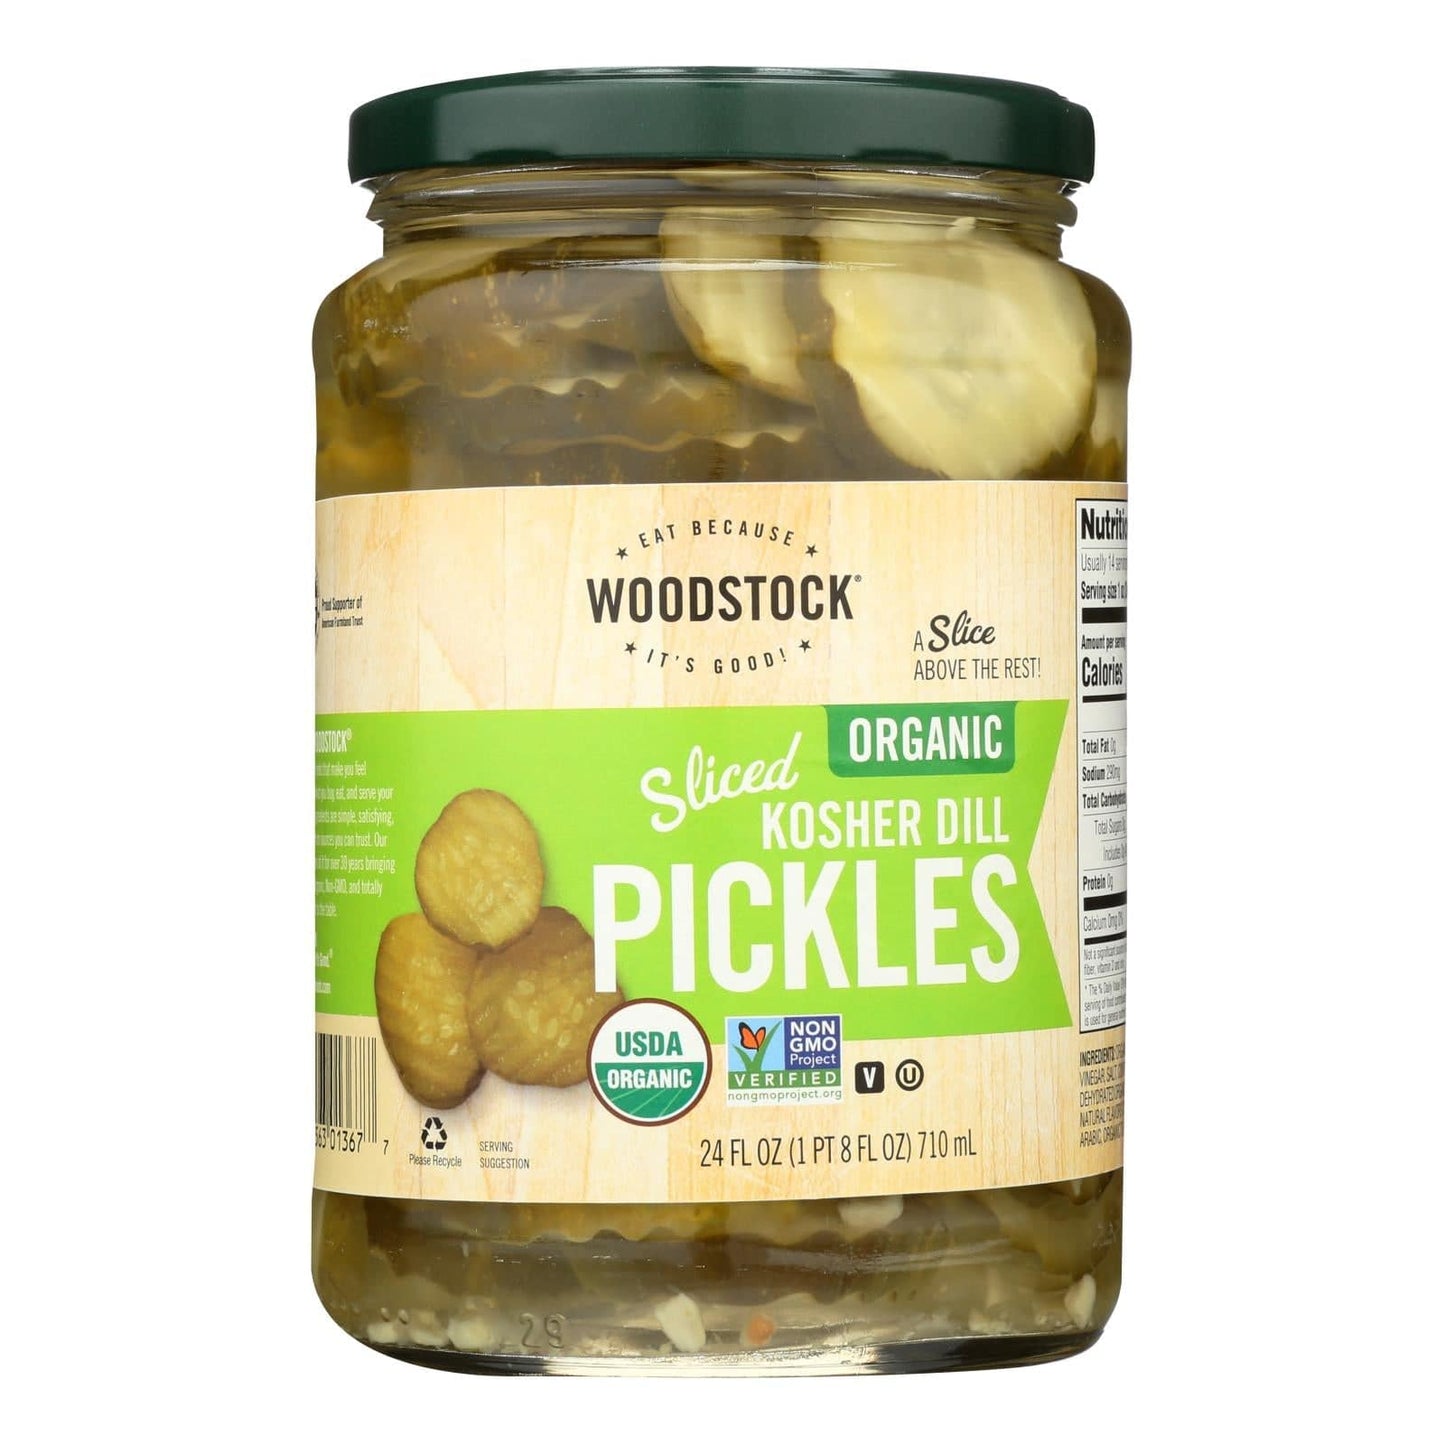 Woodstock Organic Pickles - Kosher Dill - Sliced - Case Of 6 - 24 Oz. | OnlyNaturals.us